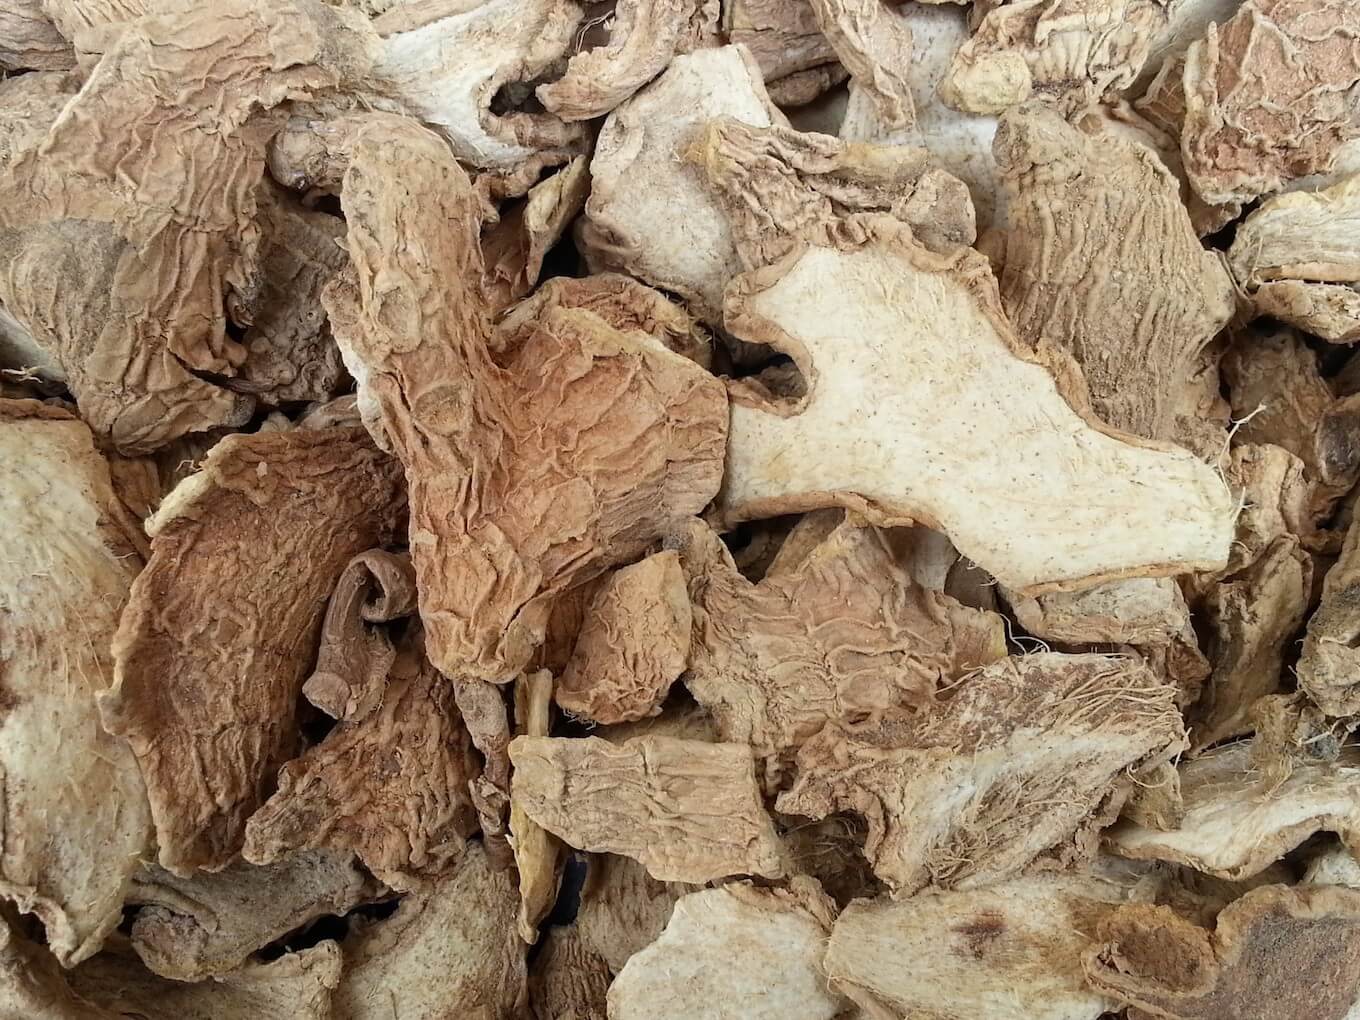 NEPC dried ginger for exports